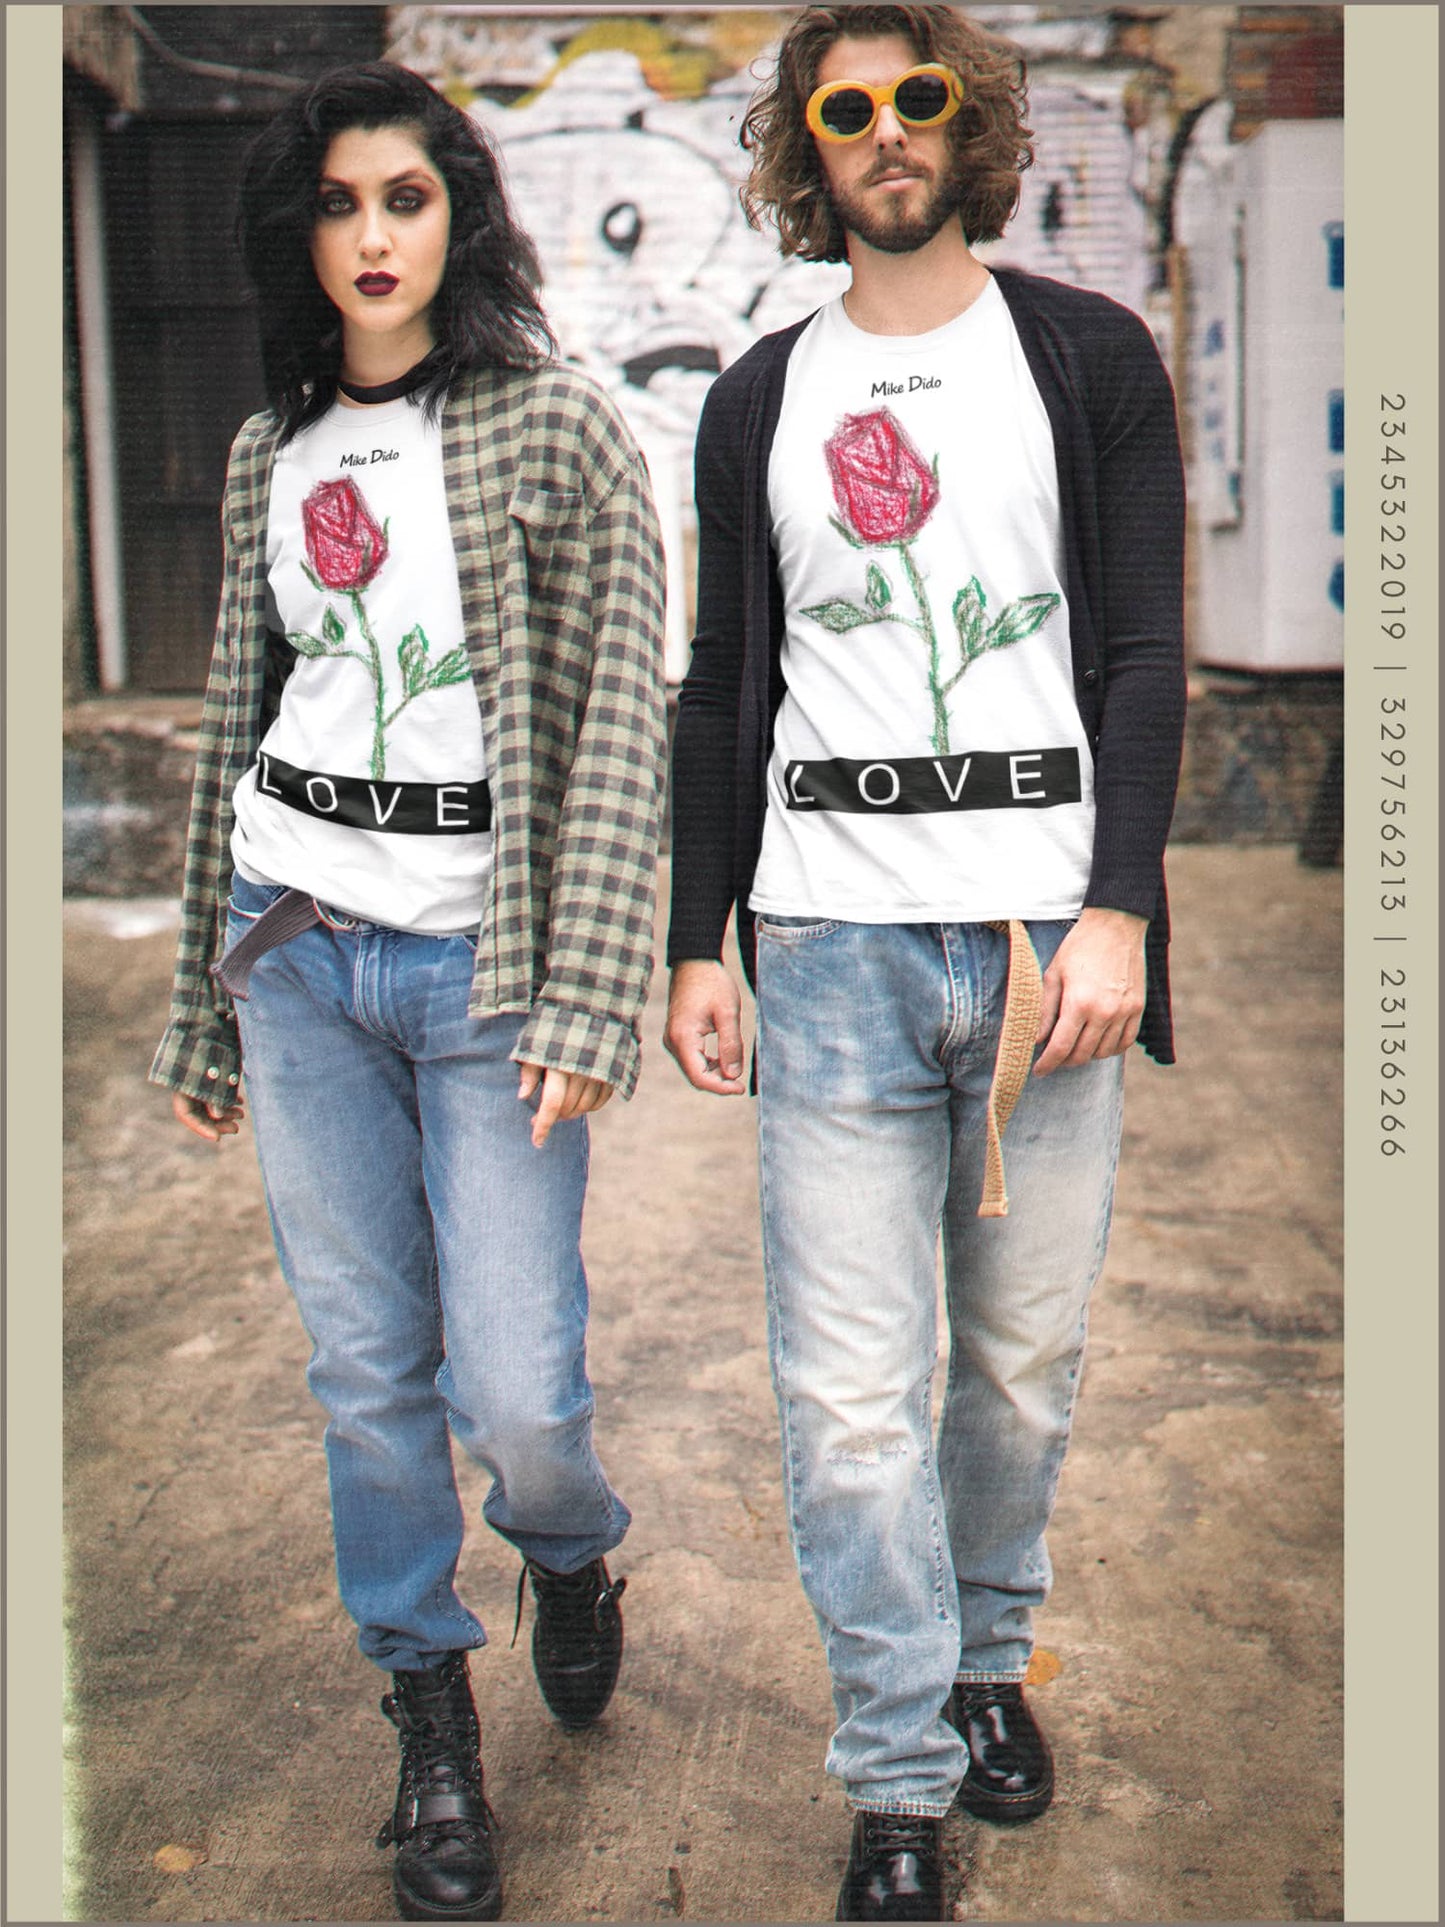 Best Graphic Tee Love Red Rose by Mike Dido